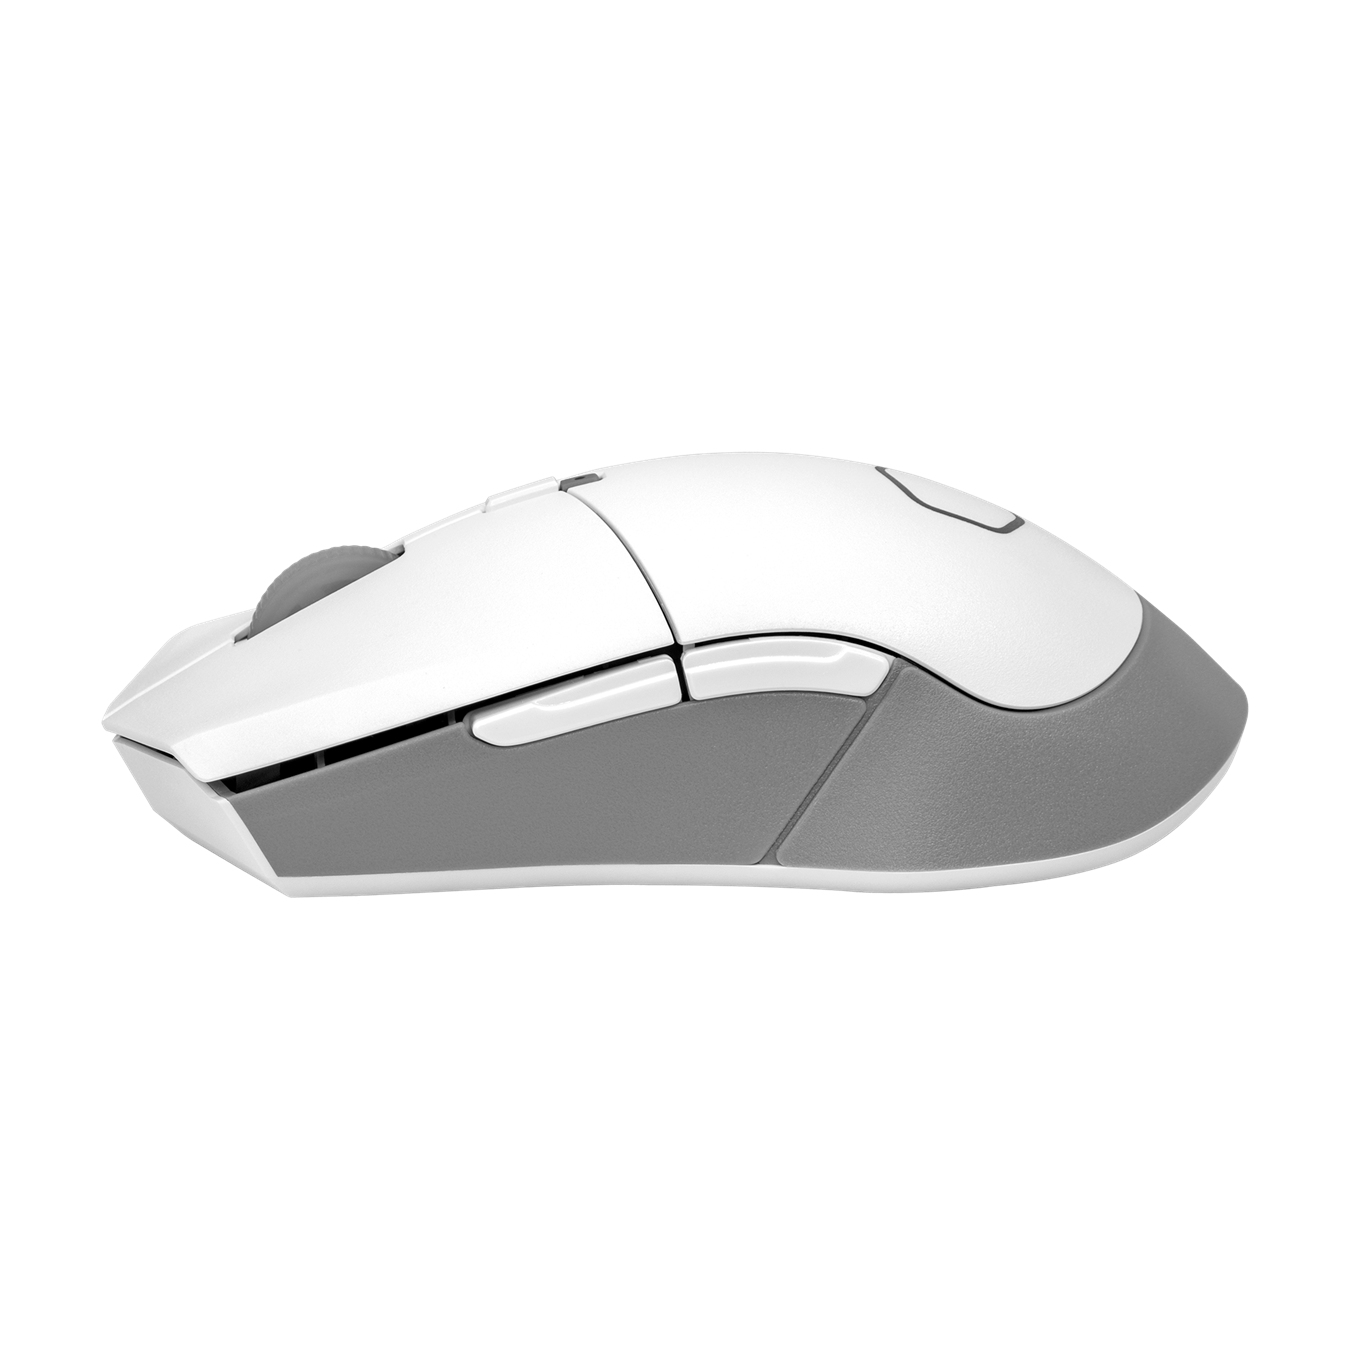 MM311 White Edition Wireless Mouse - Adapt to your game or playstyle with optical sensor adjustable up to 10,000 DPI